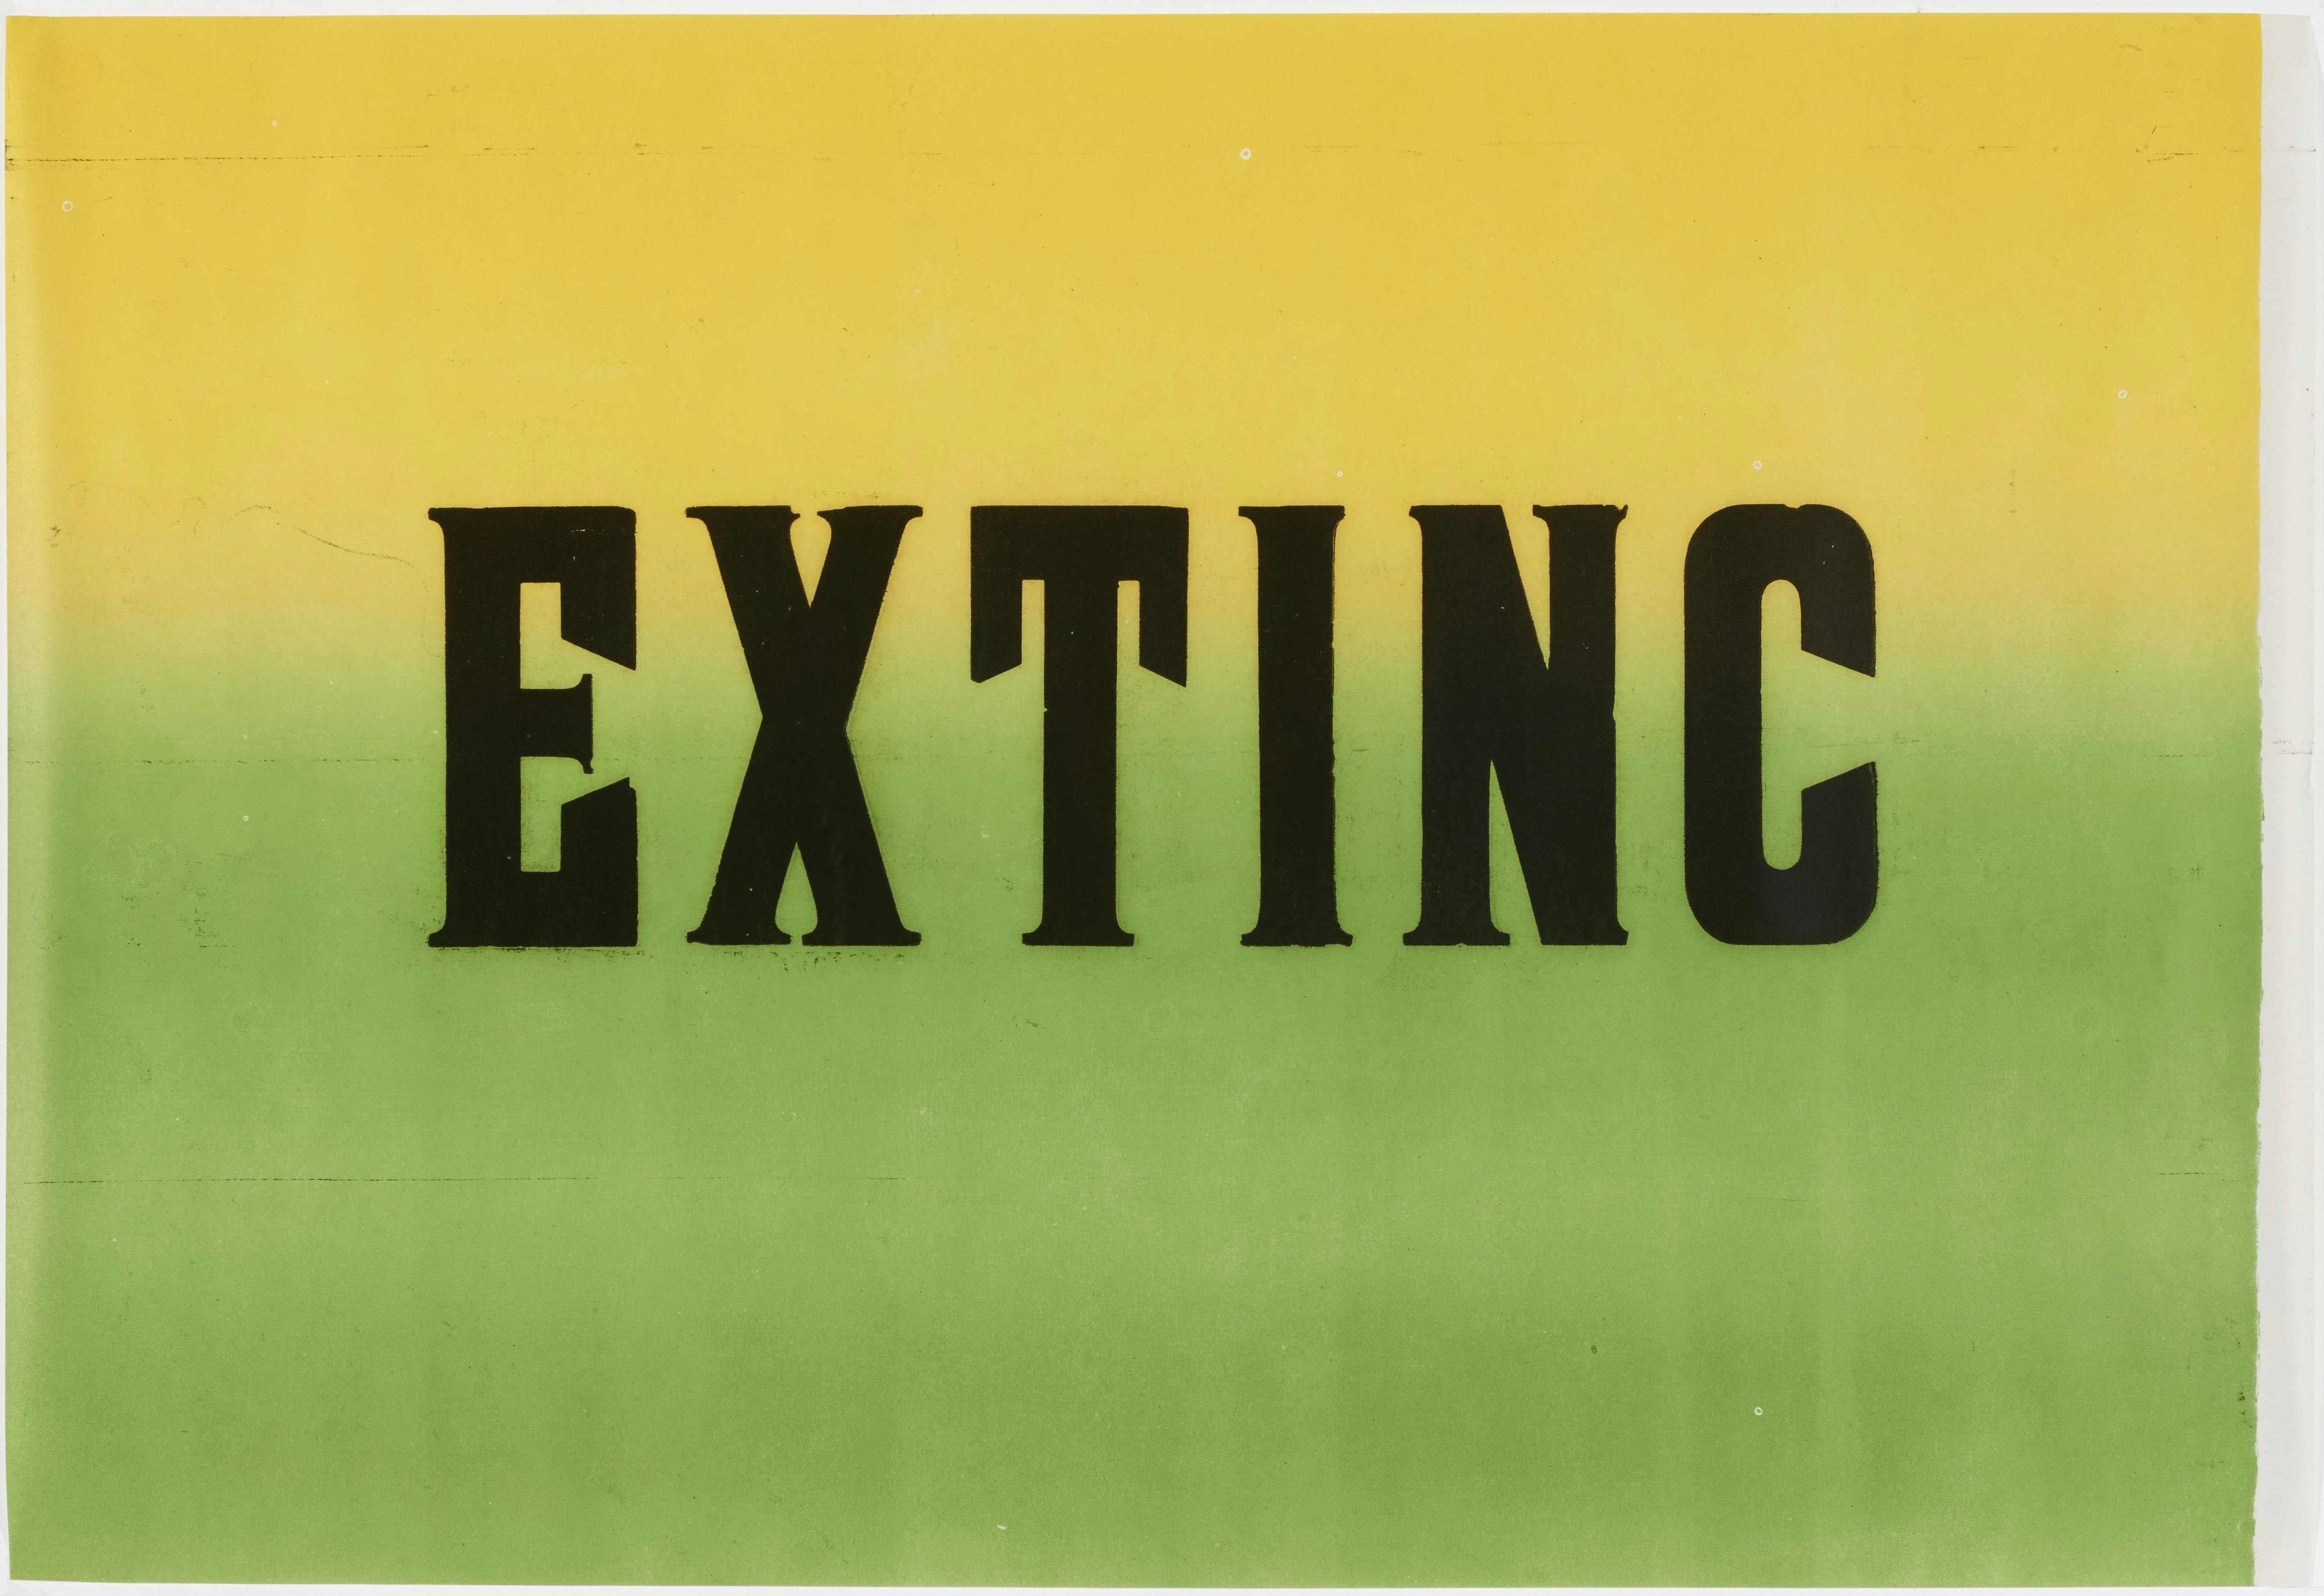 A rectangular poster oriented horizontally. Against a yellow-green gradient backdrop, the word-fragment “EXTINC” is printed in capital block letters in a serif font.